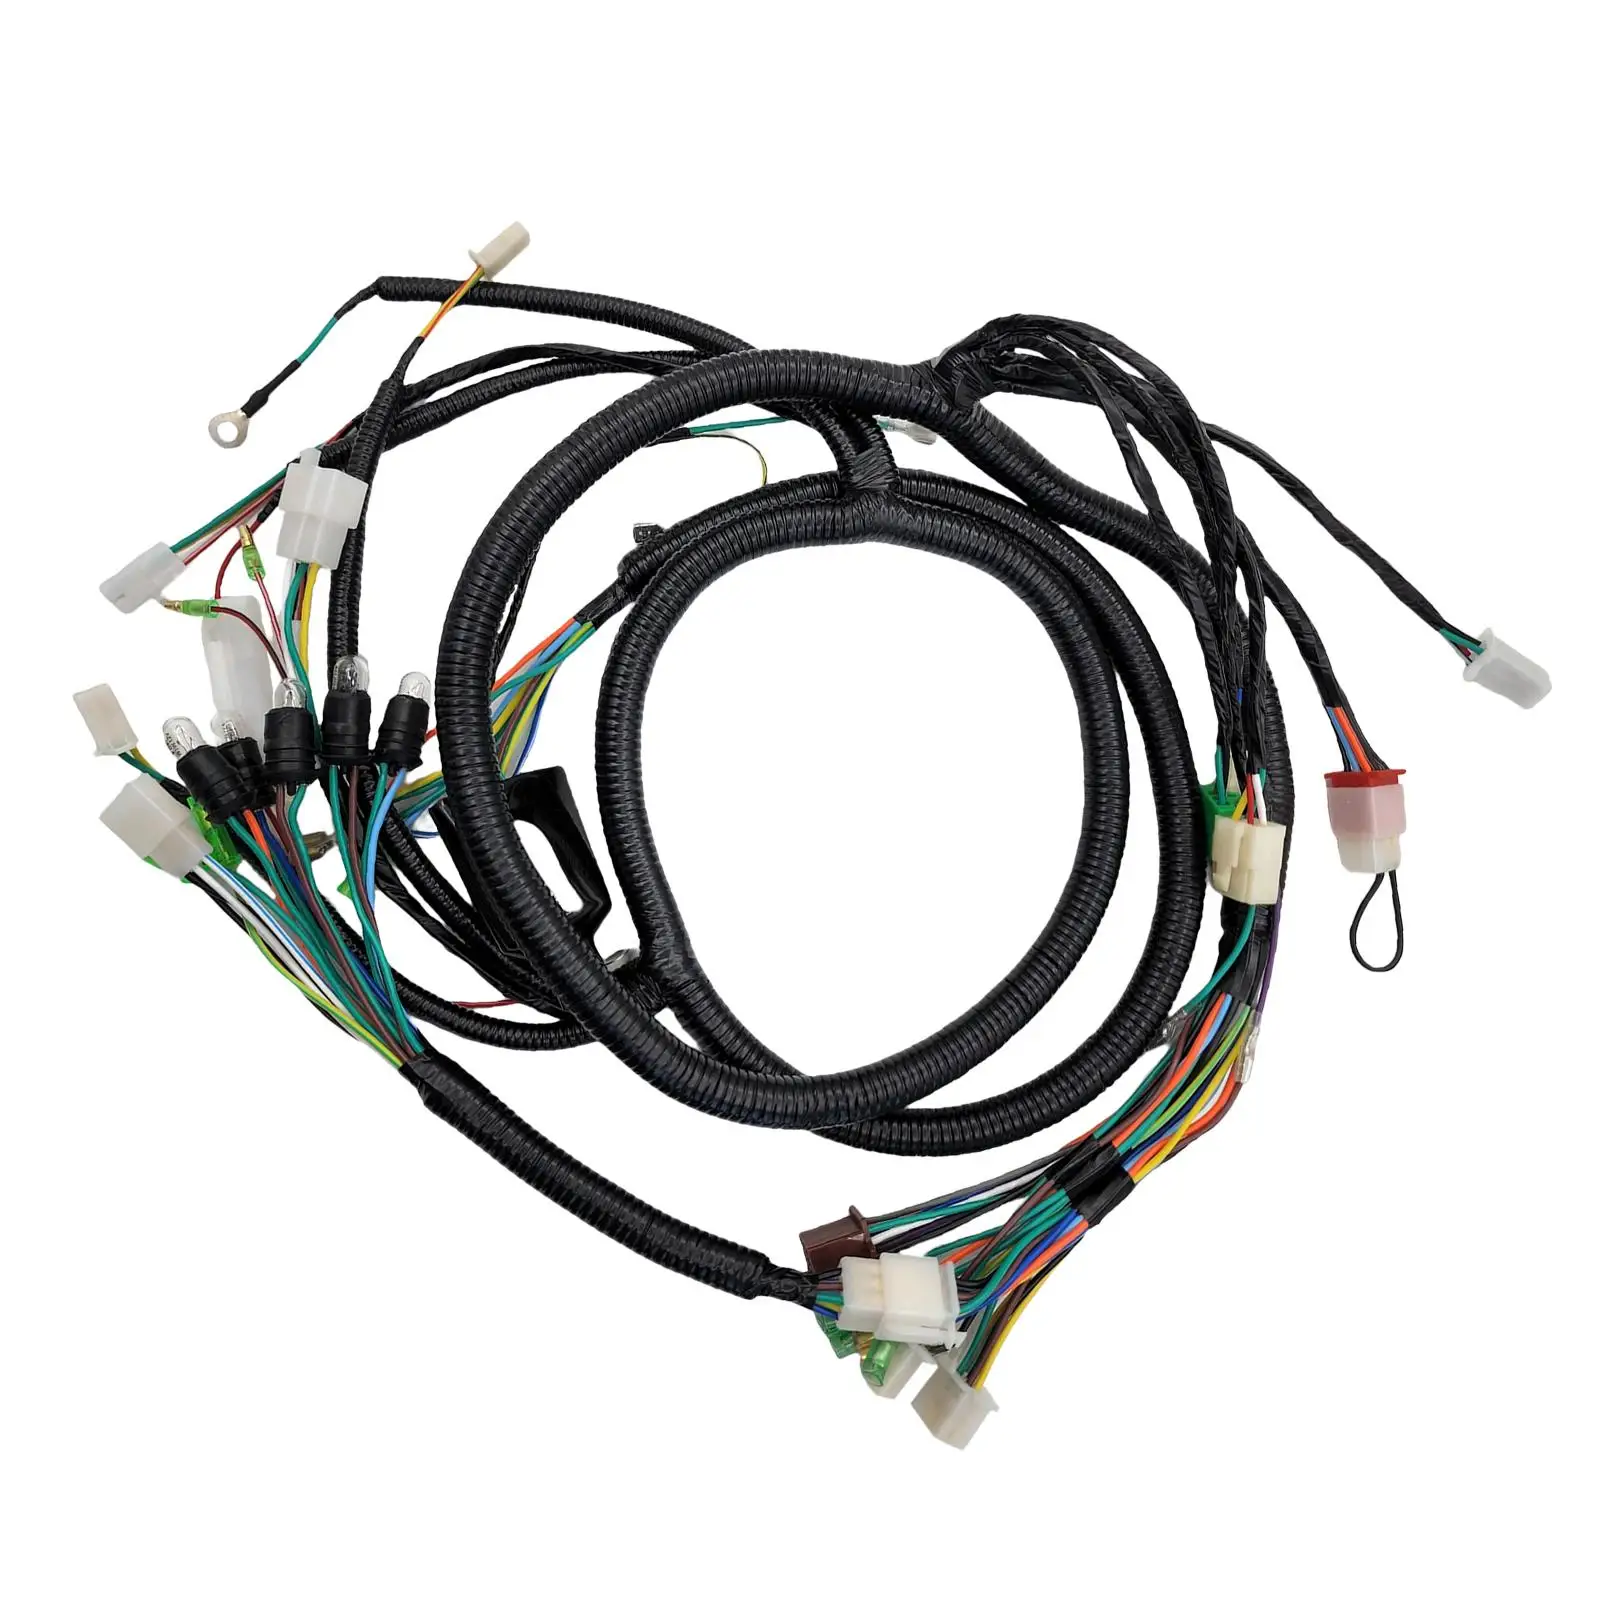 Replacement Harness Kits Wires for 50cc Scooters with 50cc Gy6 Engines, high reliability and high performance